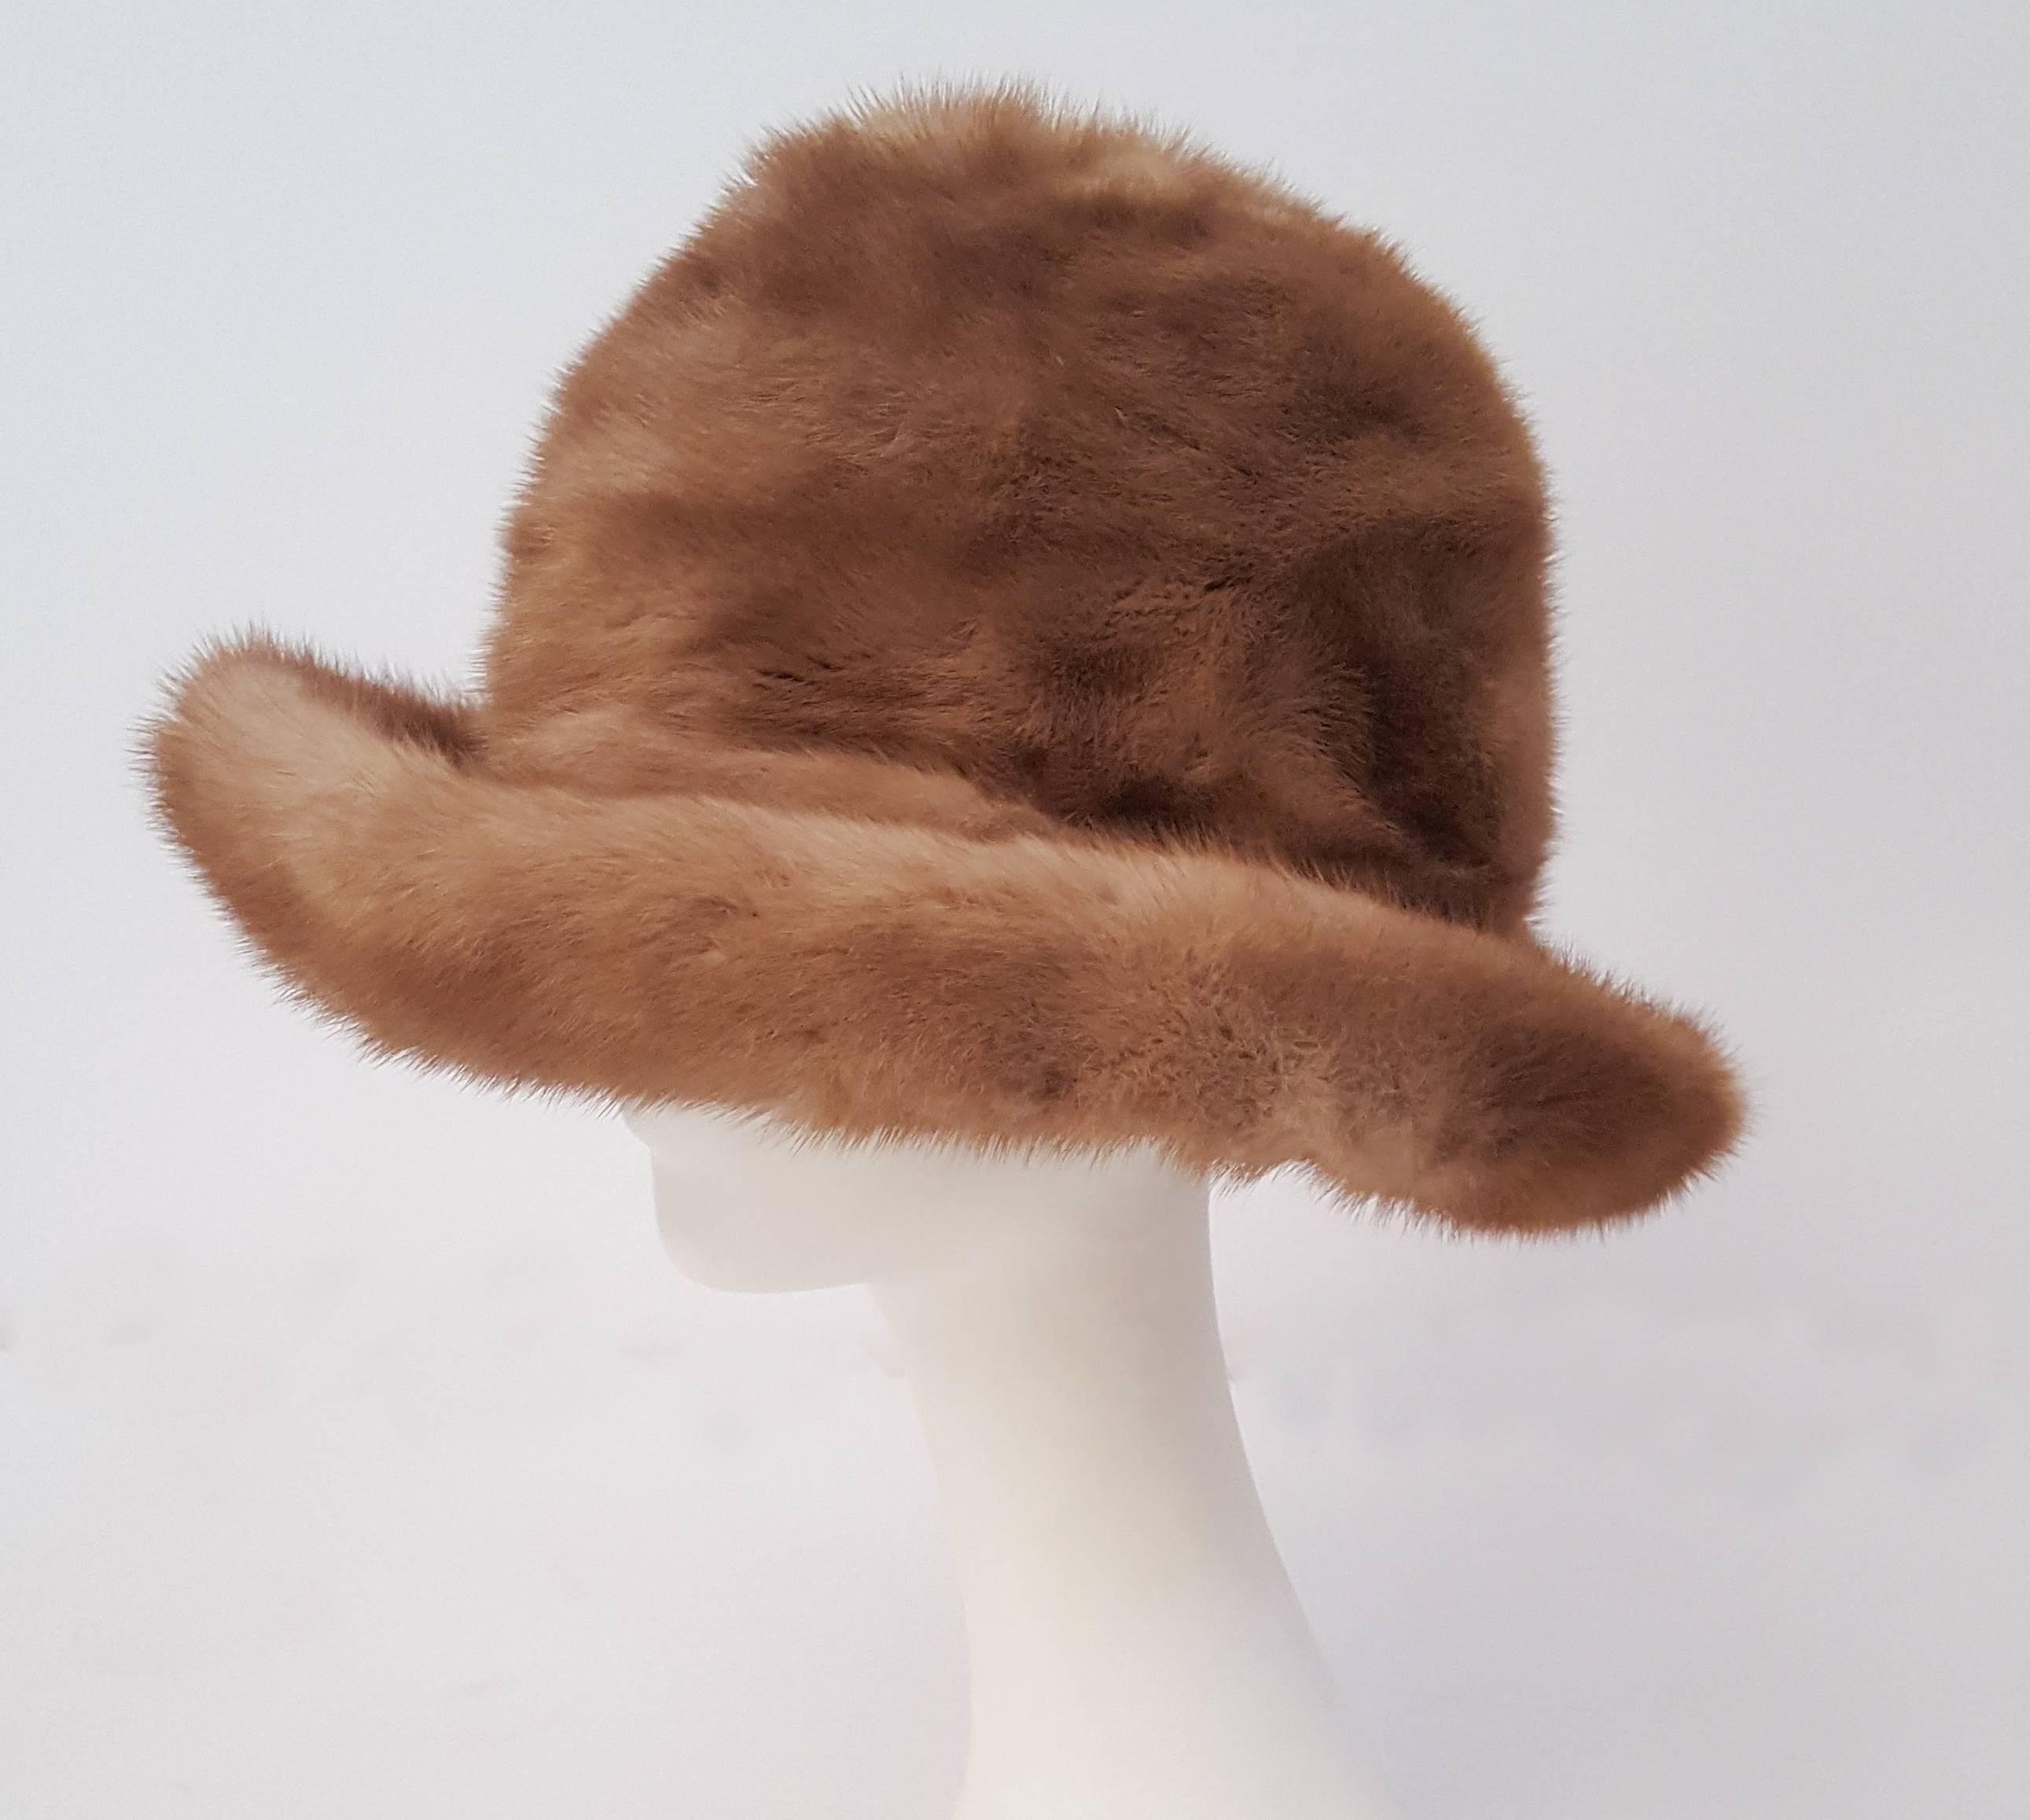 70s Natural Brown Mink Brimmed Hat. Deadstock, original store tag included. 21